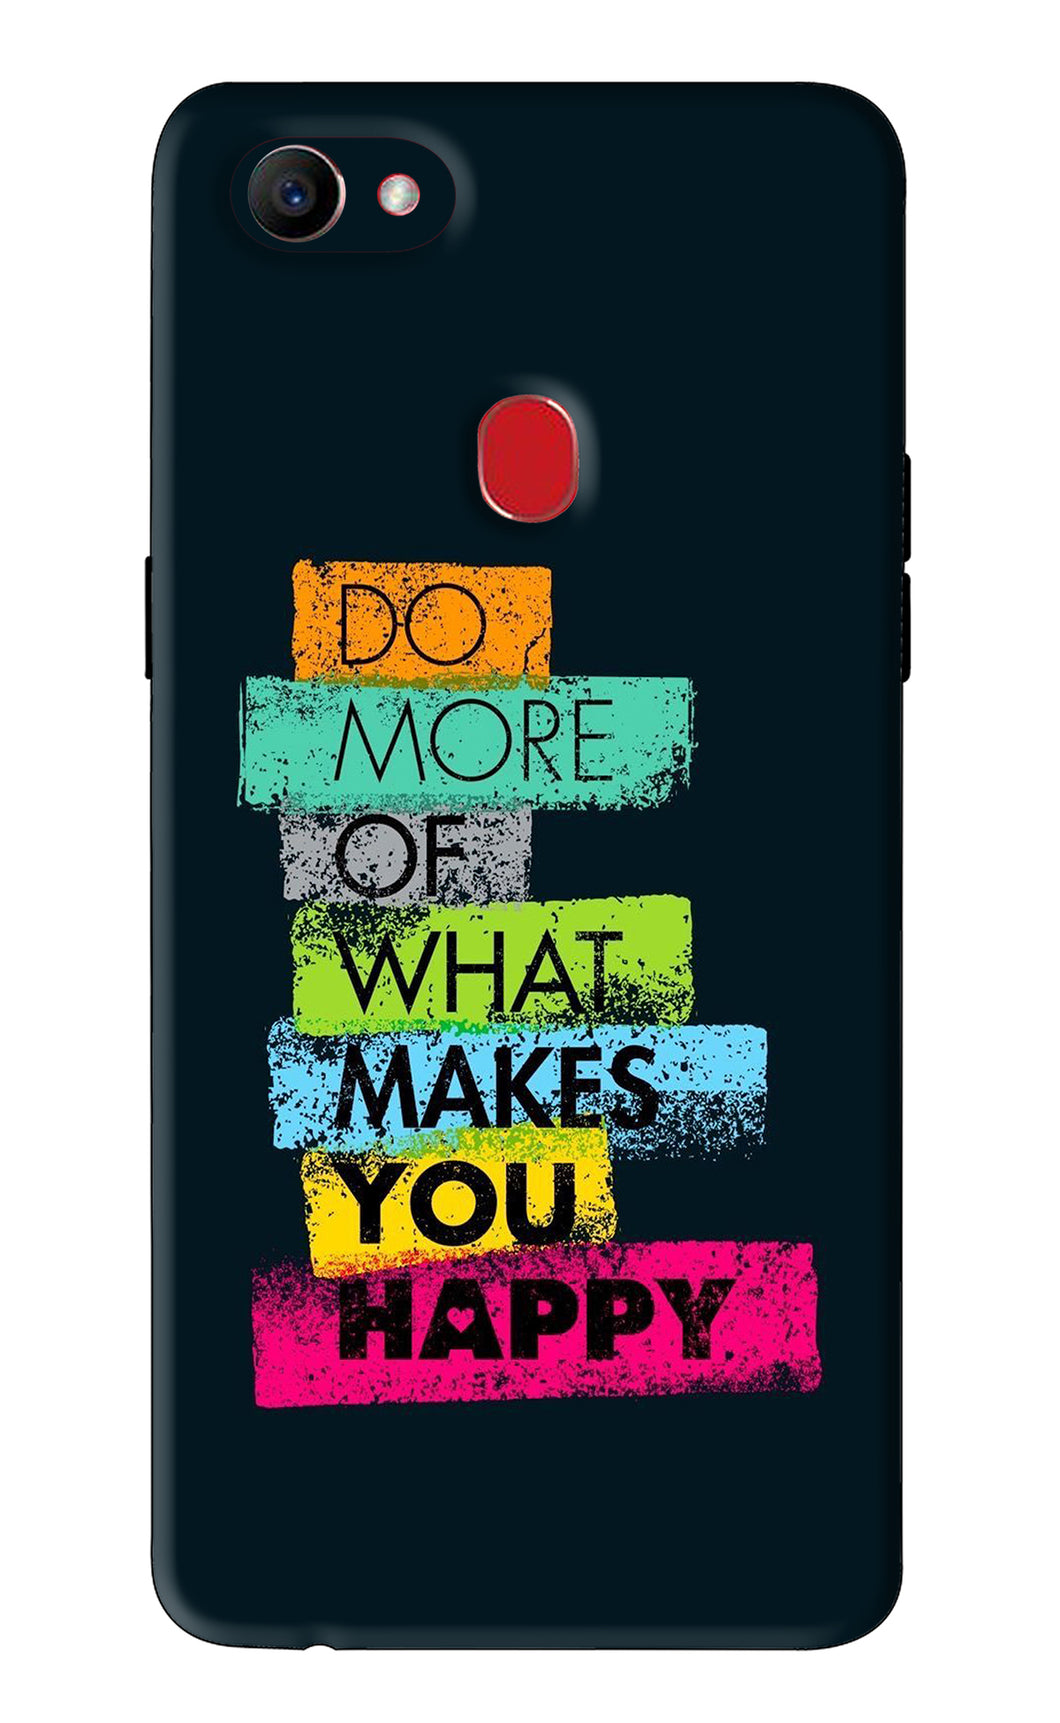 Do More Of What Makes You Happy Oppo F7 Back Skin Wrap